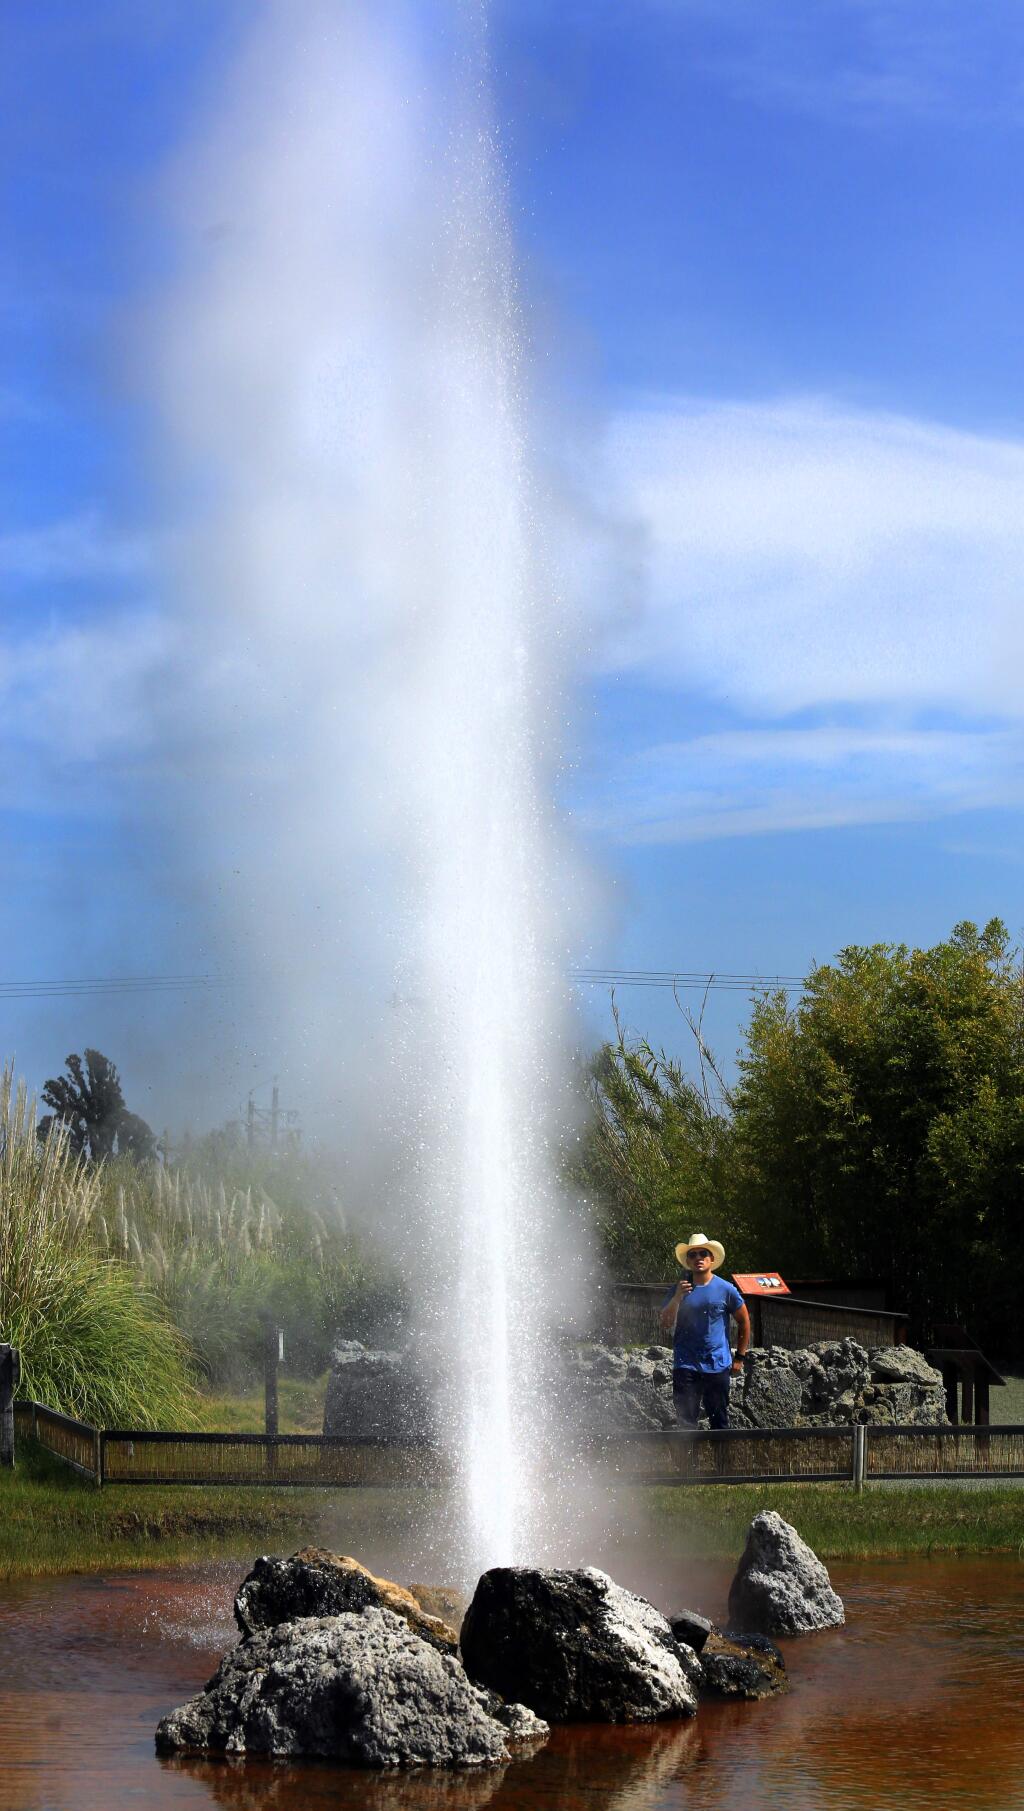 -Rene Paz of Ventura makes a video of the Old Faithful Geyser of California in Calistoga. The geyser is now erupting about every 10 minutes.